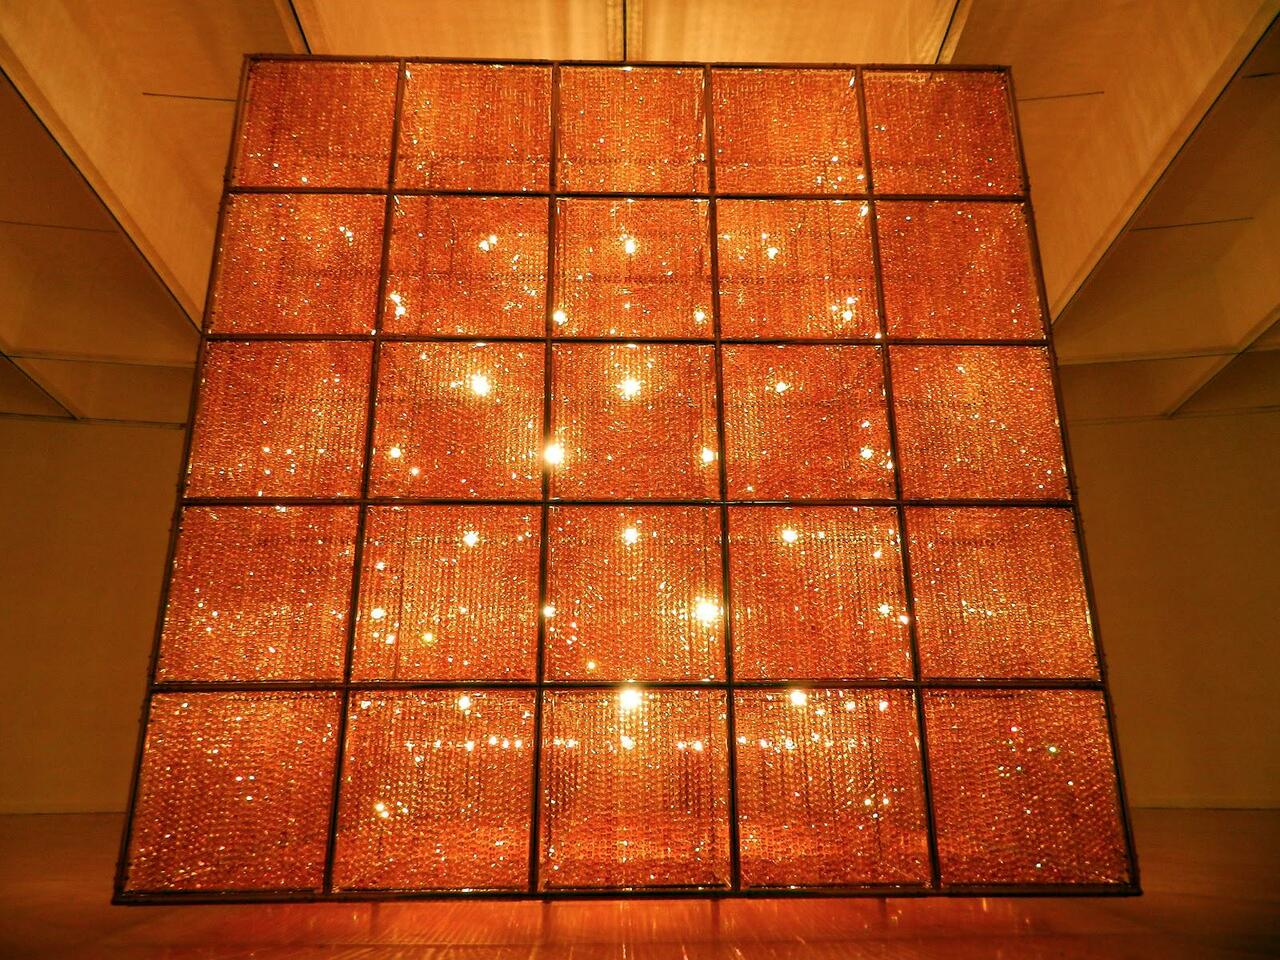 #Minimalism on fire! Cube Light, #Weiwei #Installation #art ©Miguel Villagran/Getty Images http://on.fb.me/1uoyNm7 http://t.co/F4acBa3K5H